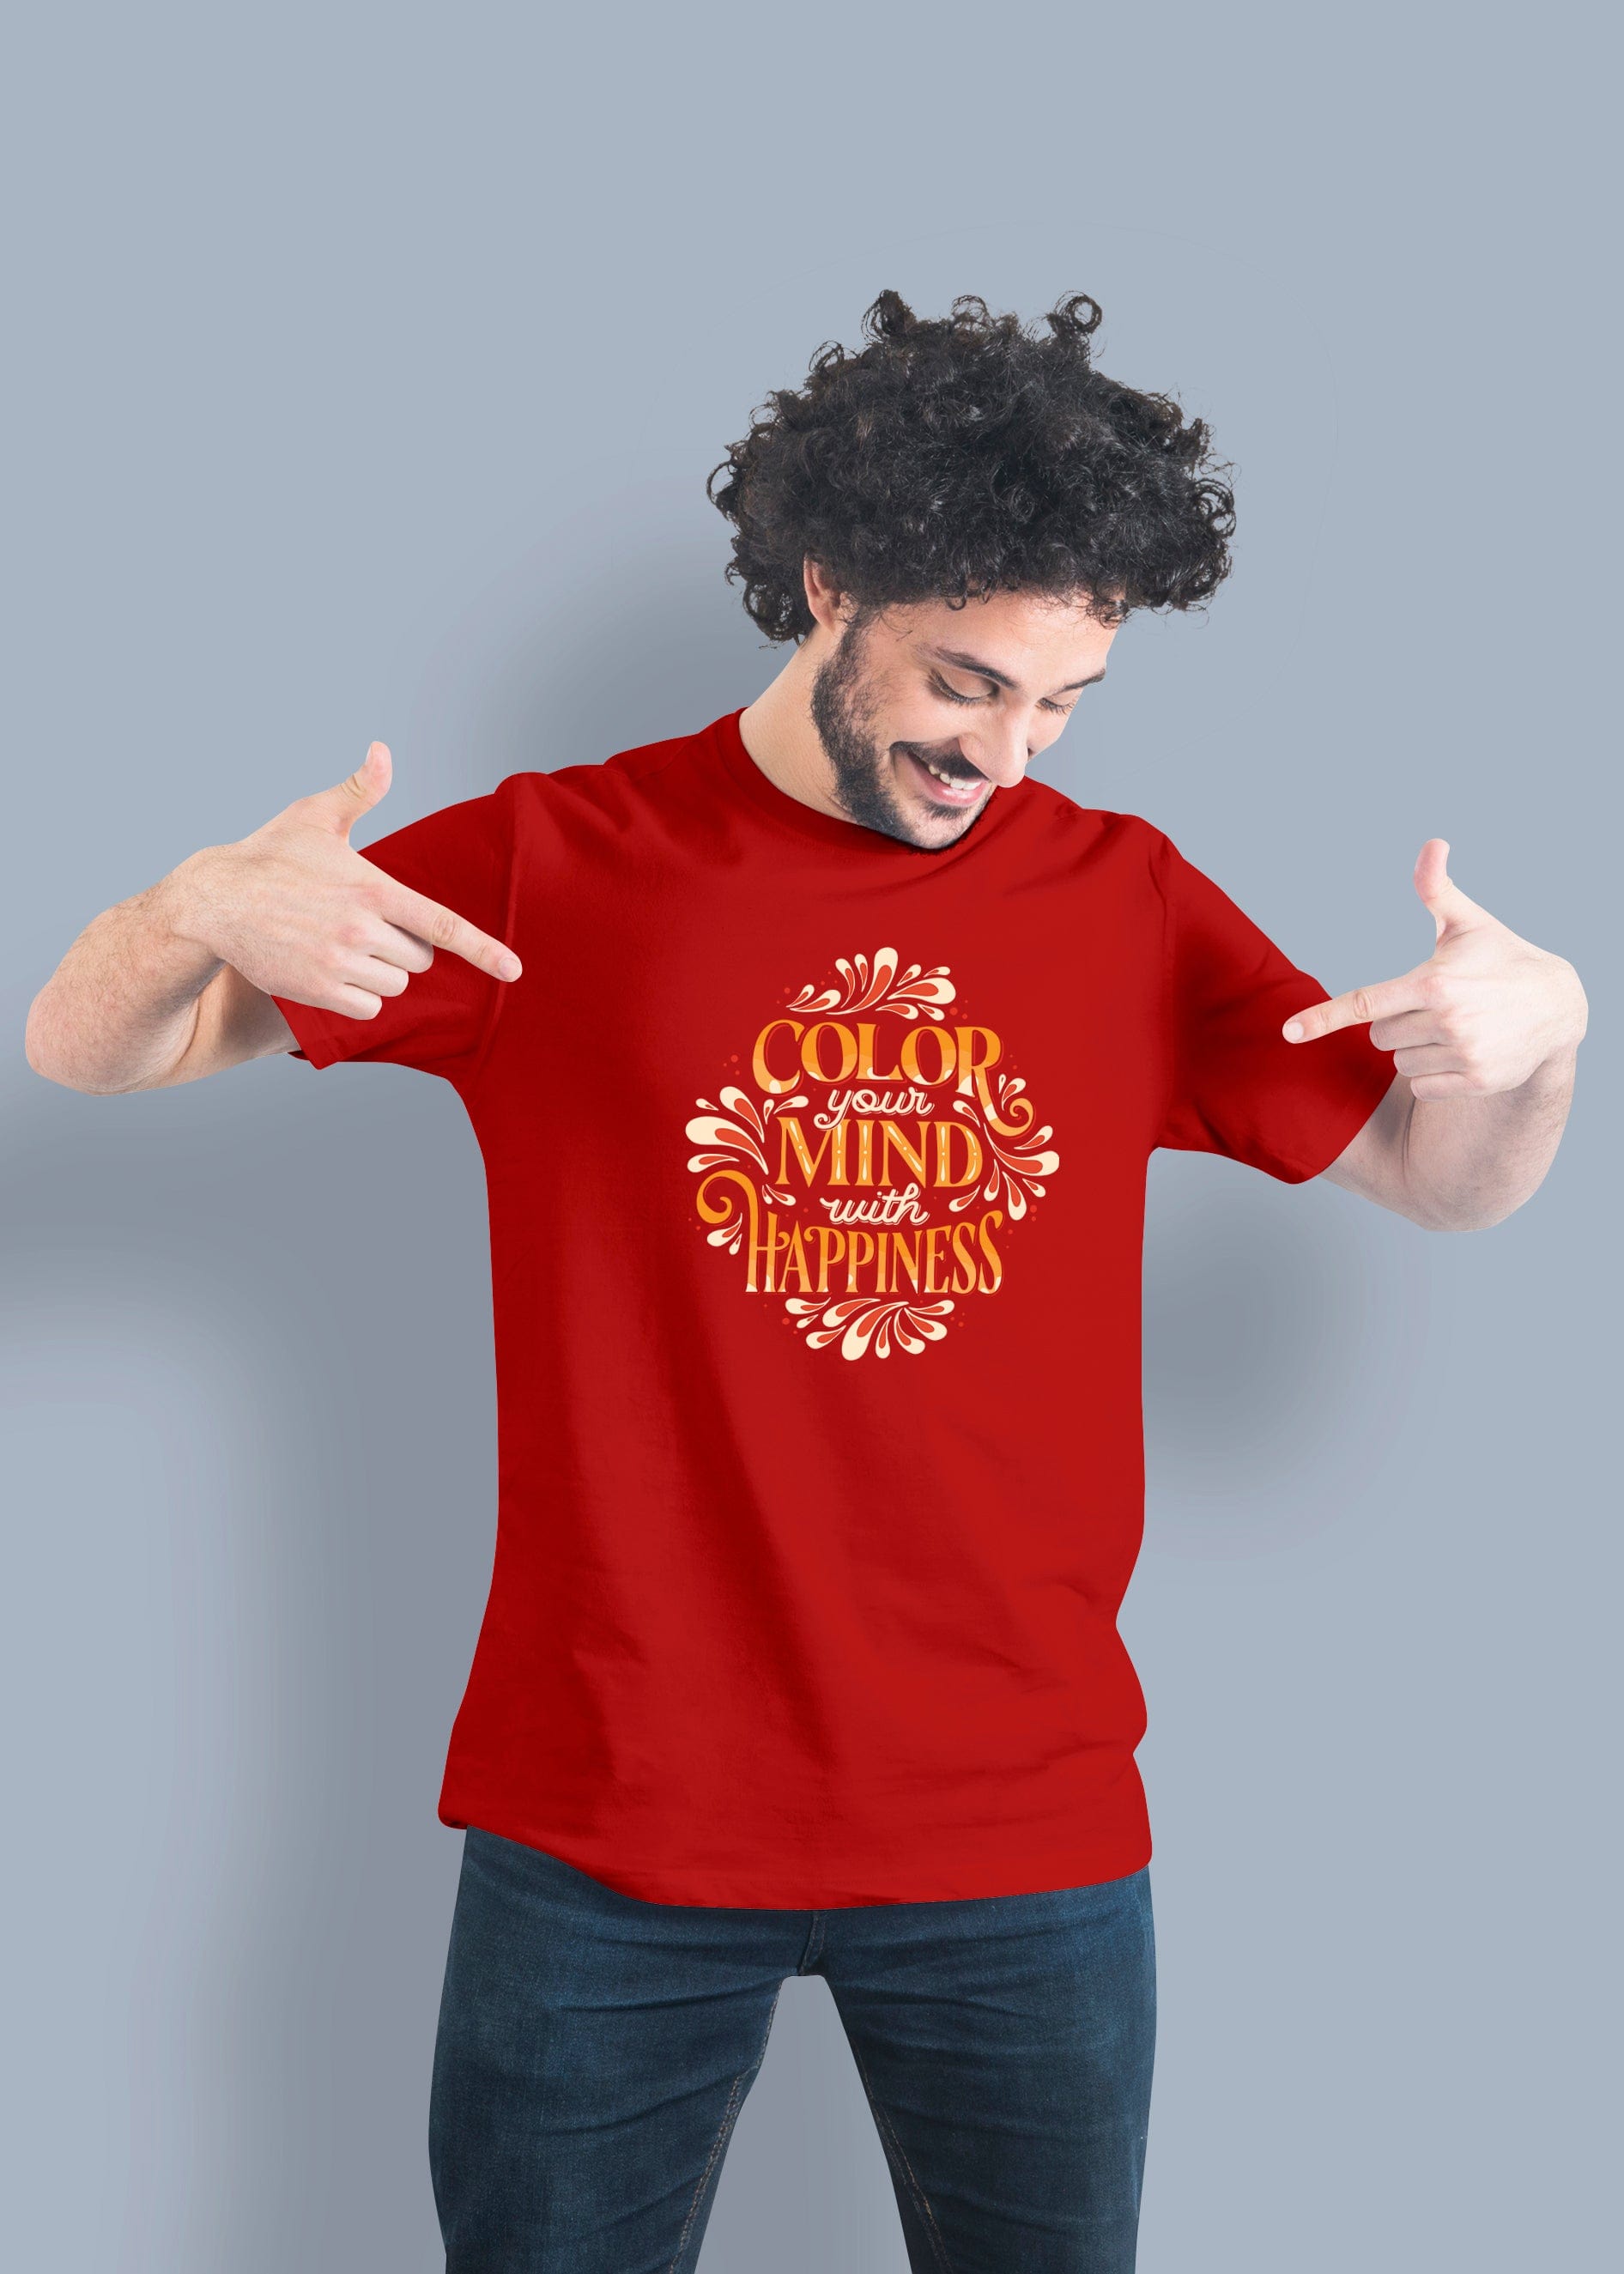 Cool Mind Happiness Printed Half Sleeve Premium Cotton T-shirt For Men